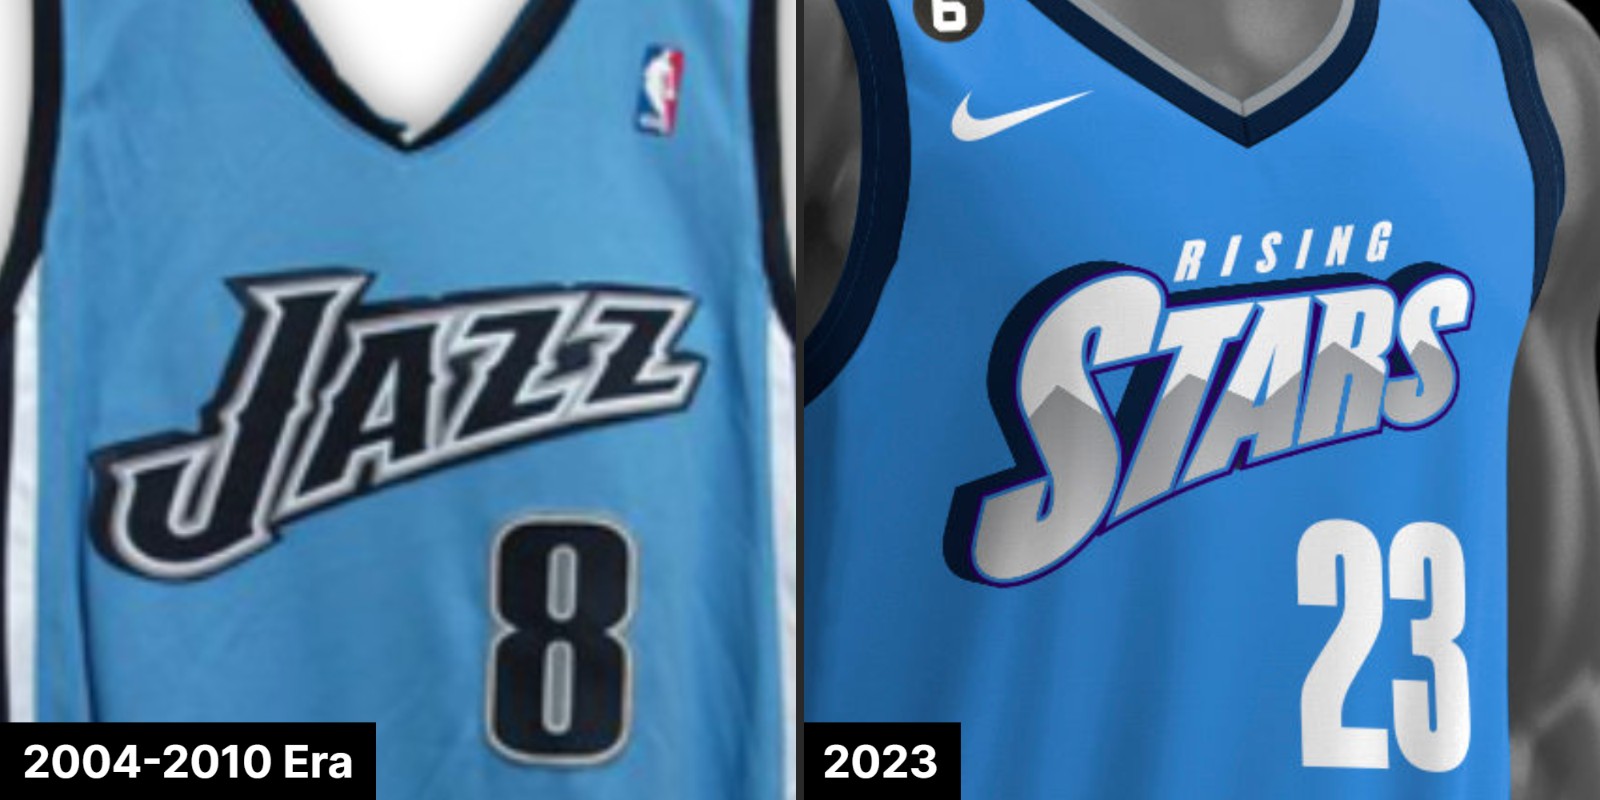 Whipped up some Jazz inspired 2023 All Star game concept jerseys